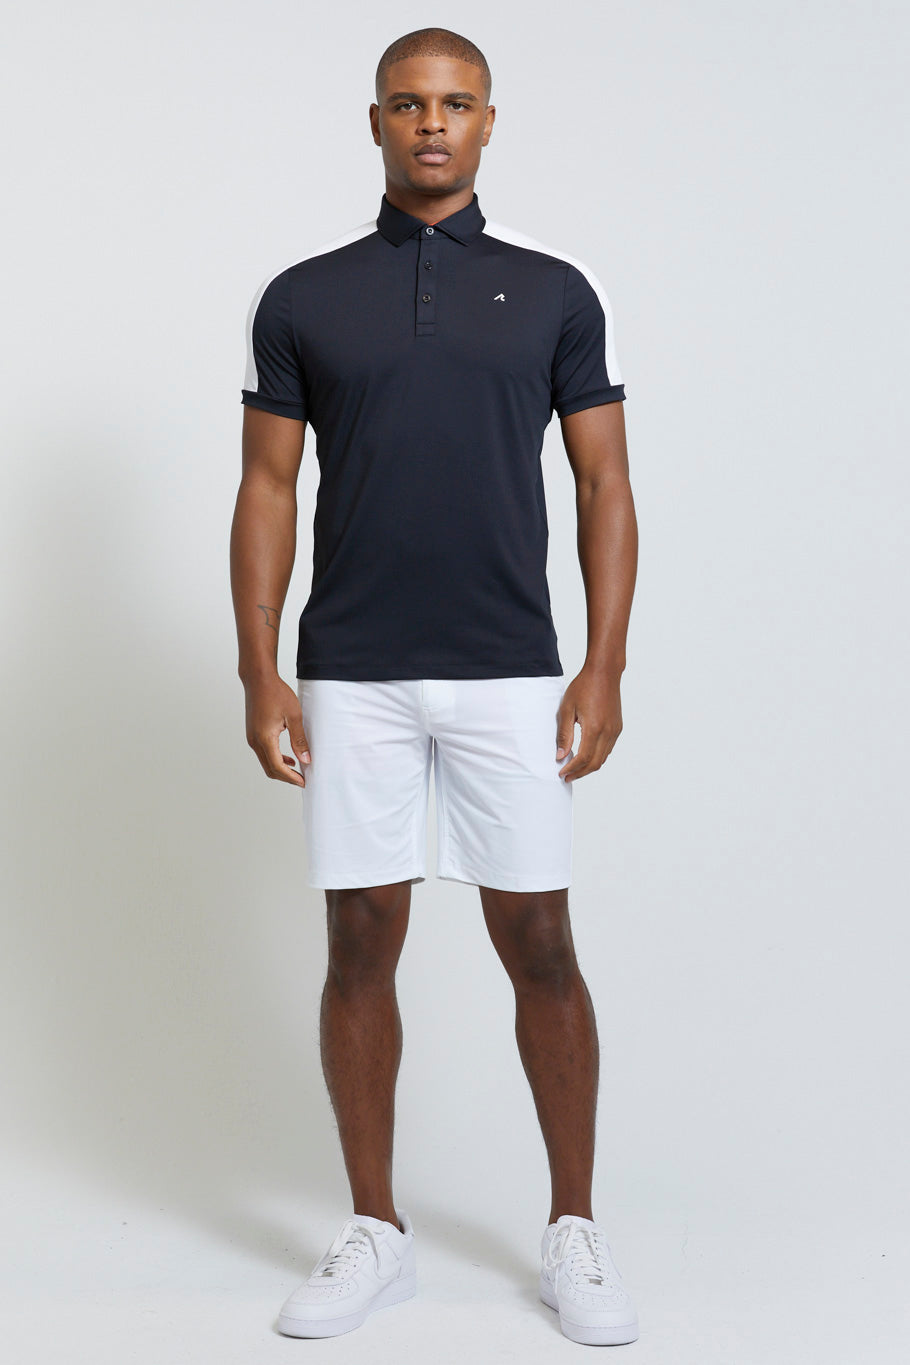 Image of the evans polo in tuxedo